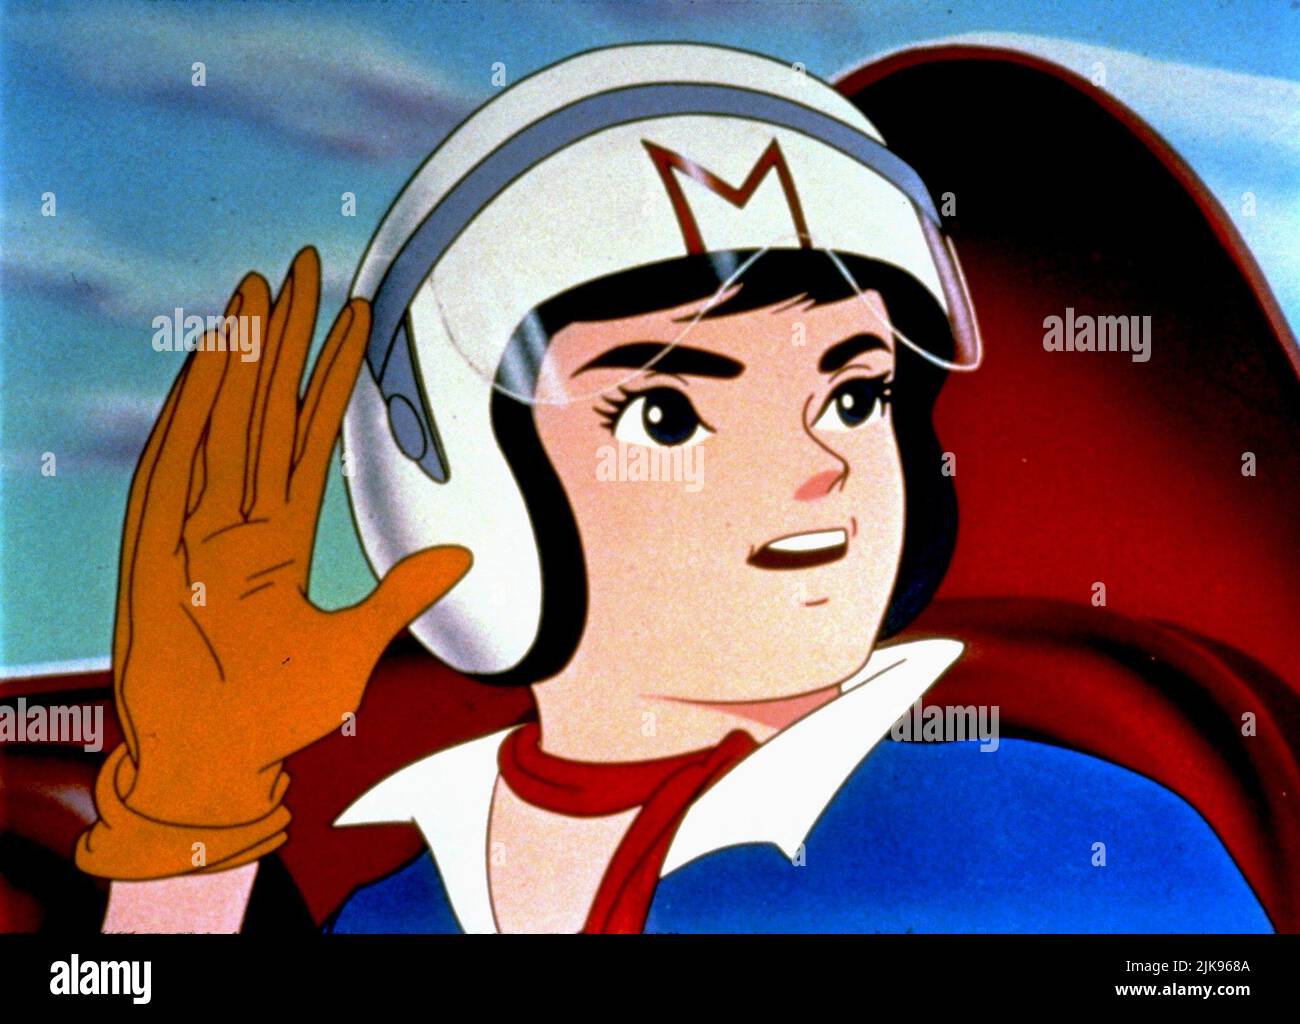 Top 9 Anime Shows From the 60s, 70s, and 80s | Speed racer cartoon, Speed  racer, Racer